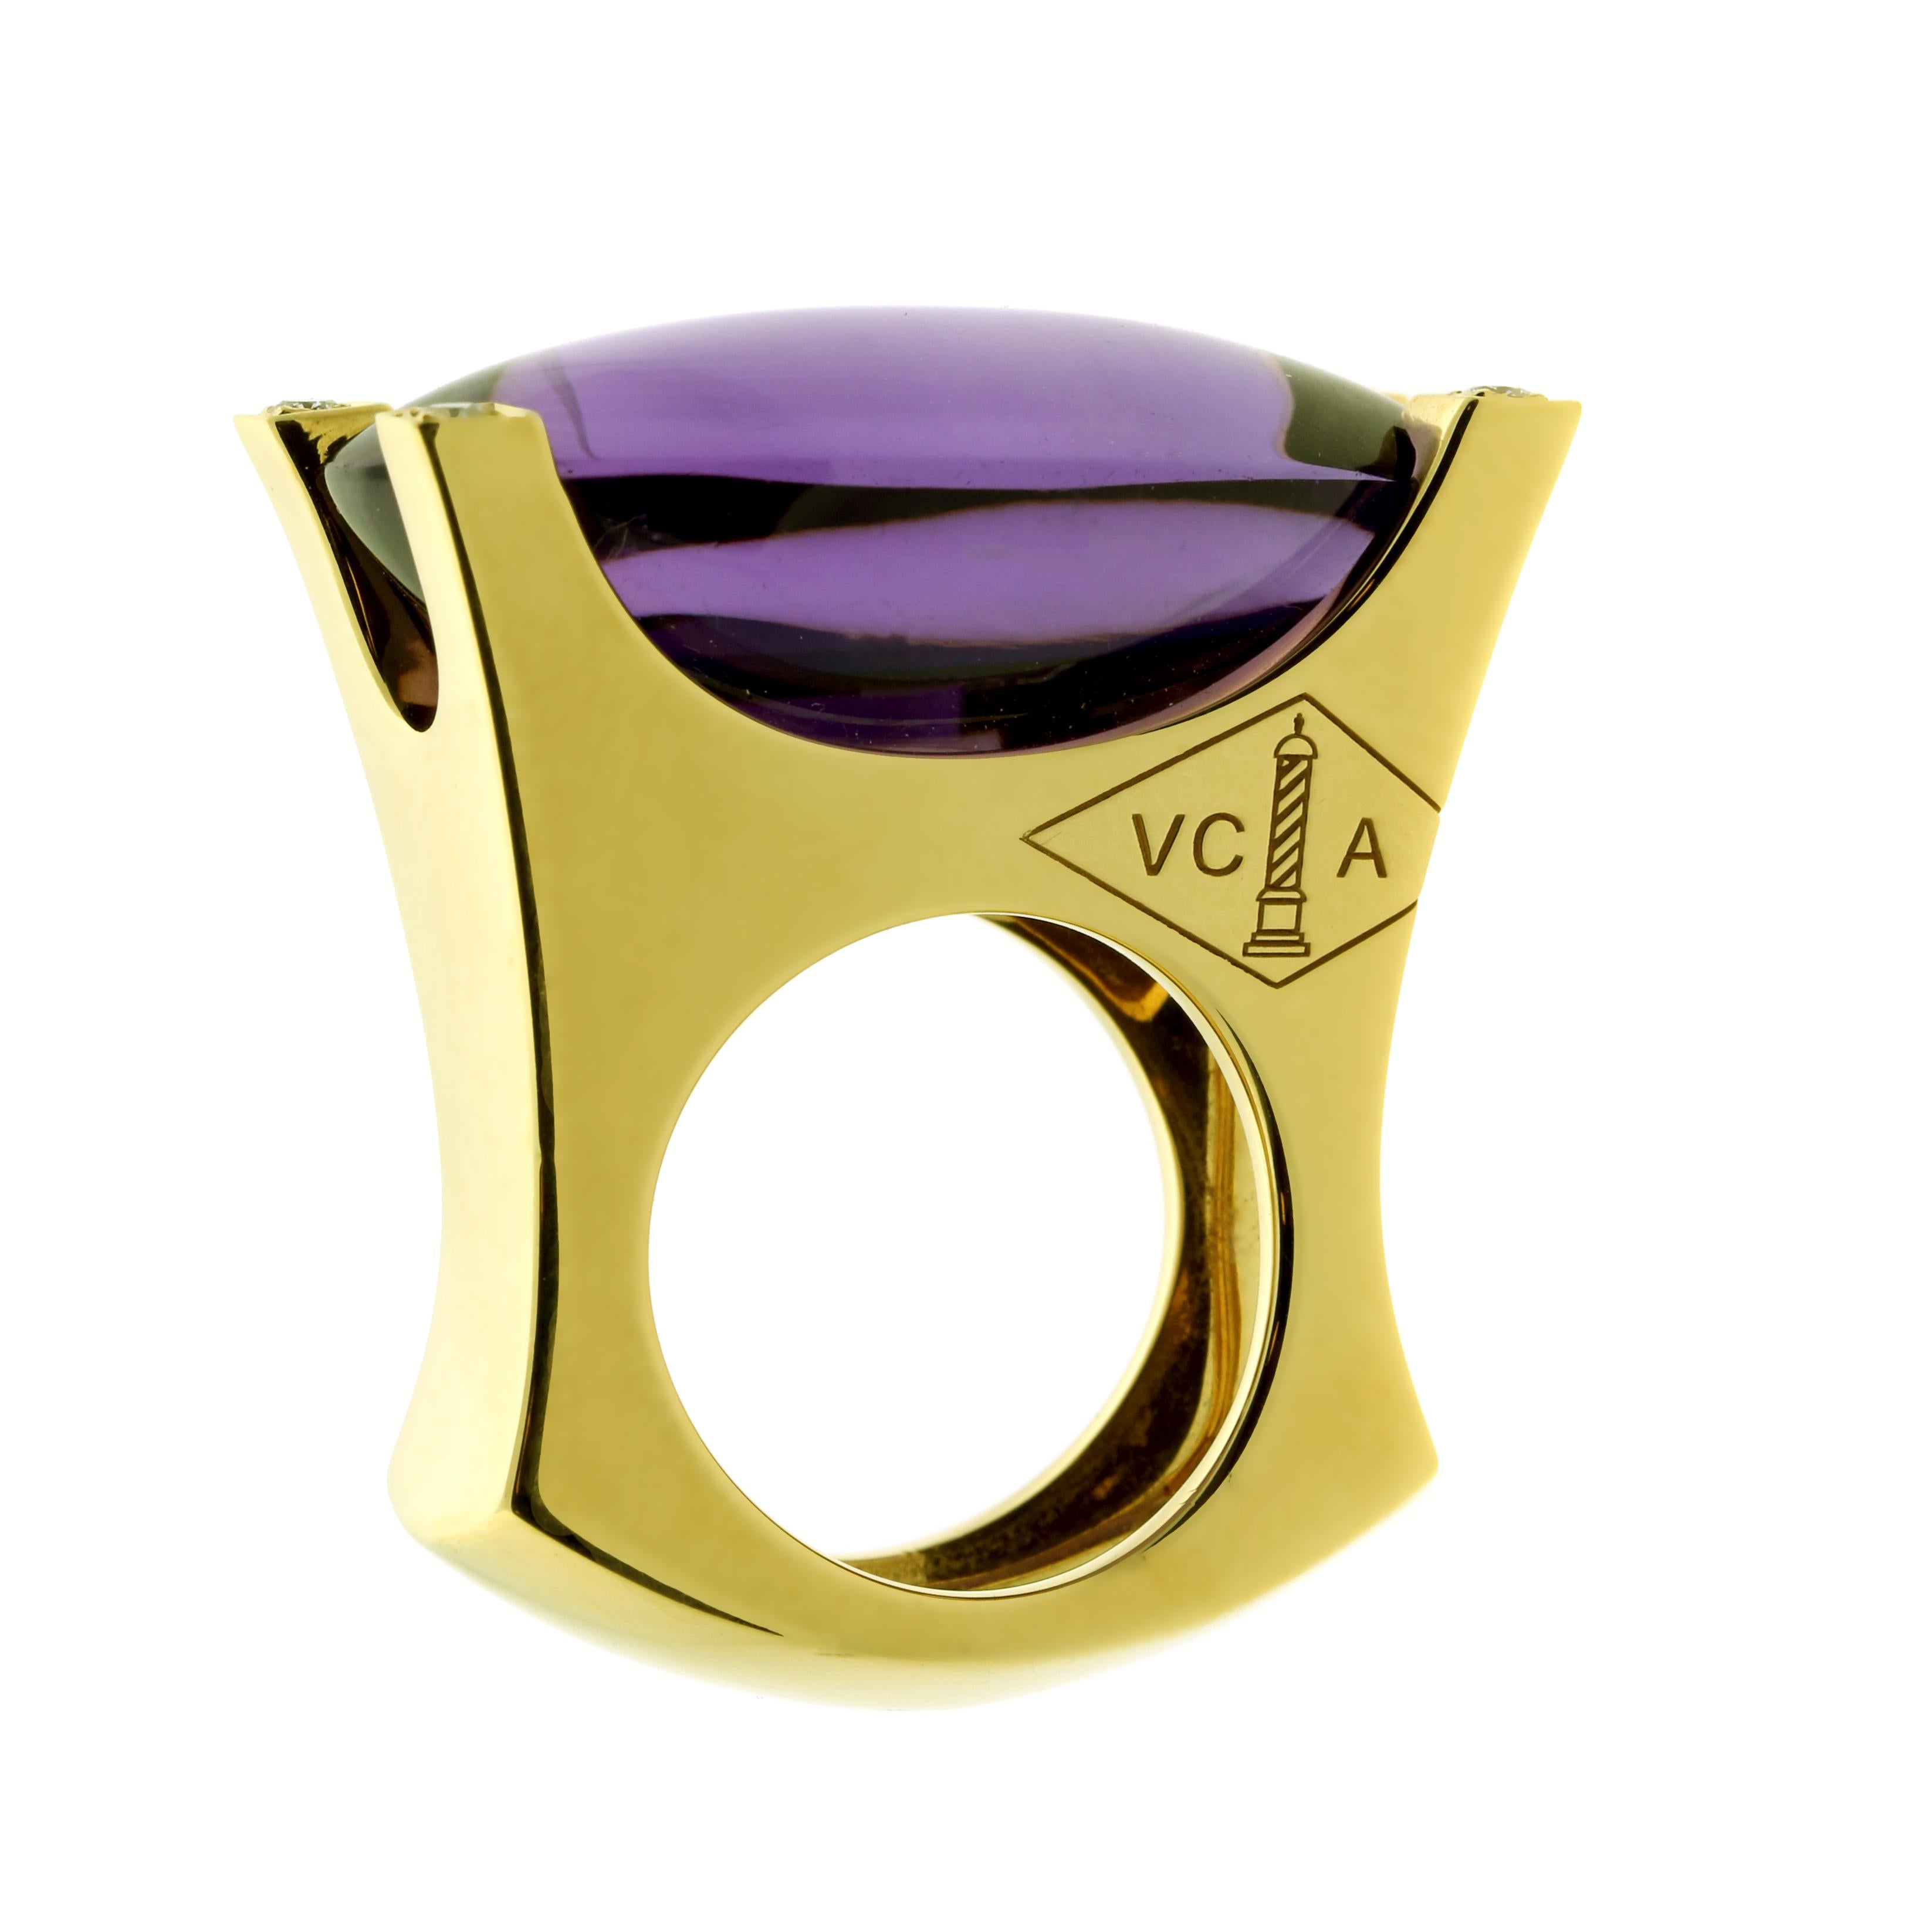 Van Cleef & Arpels Gold Diamond and Amethyst Ring For Sale 1